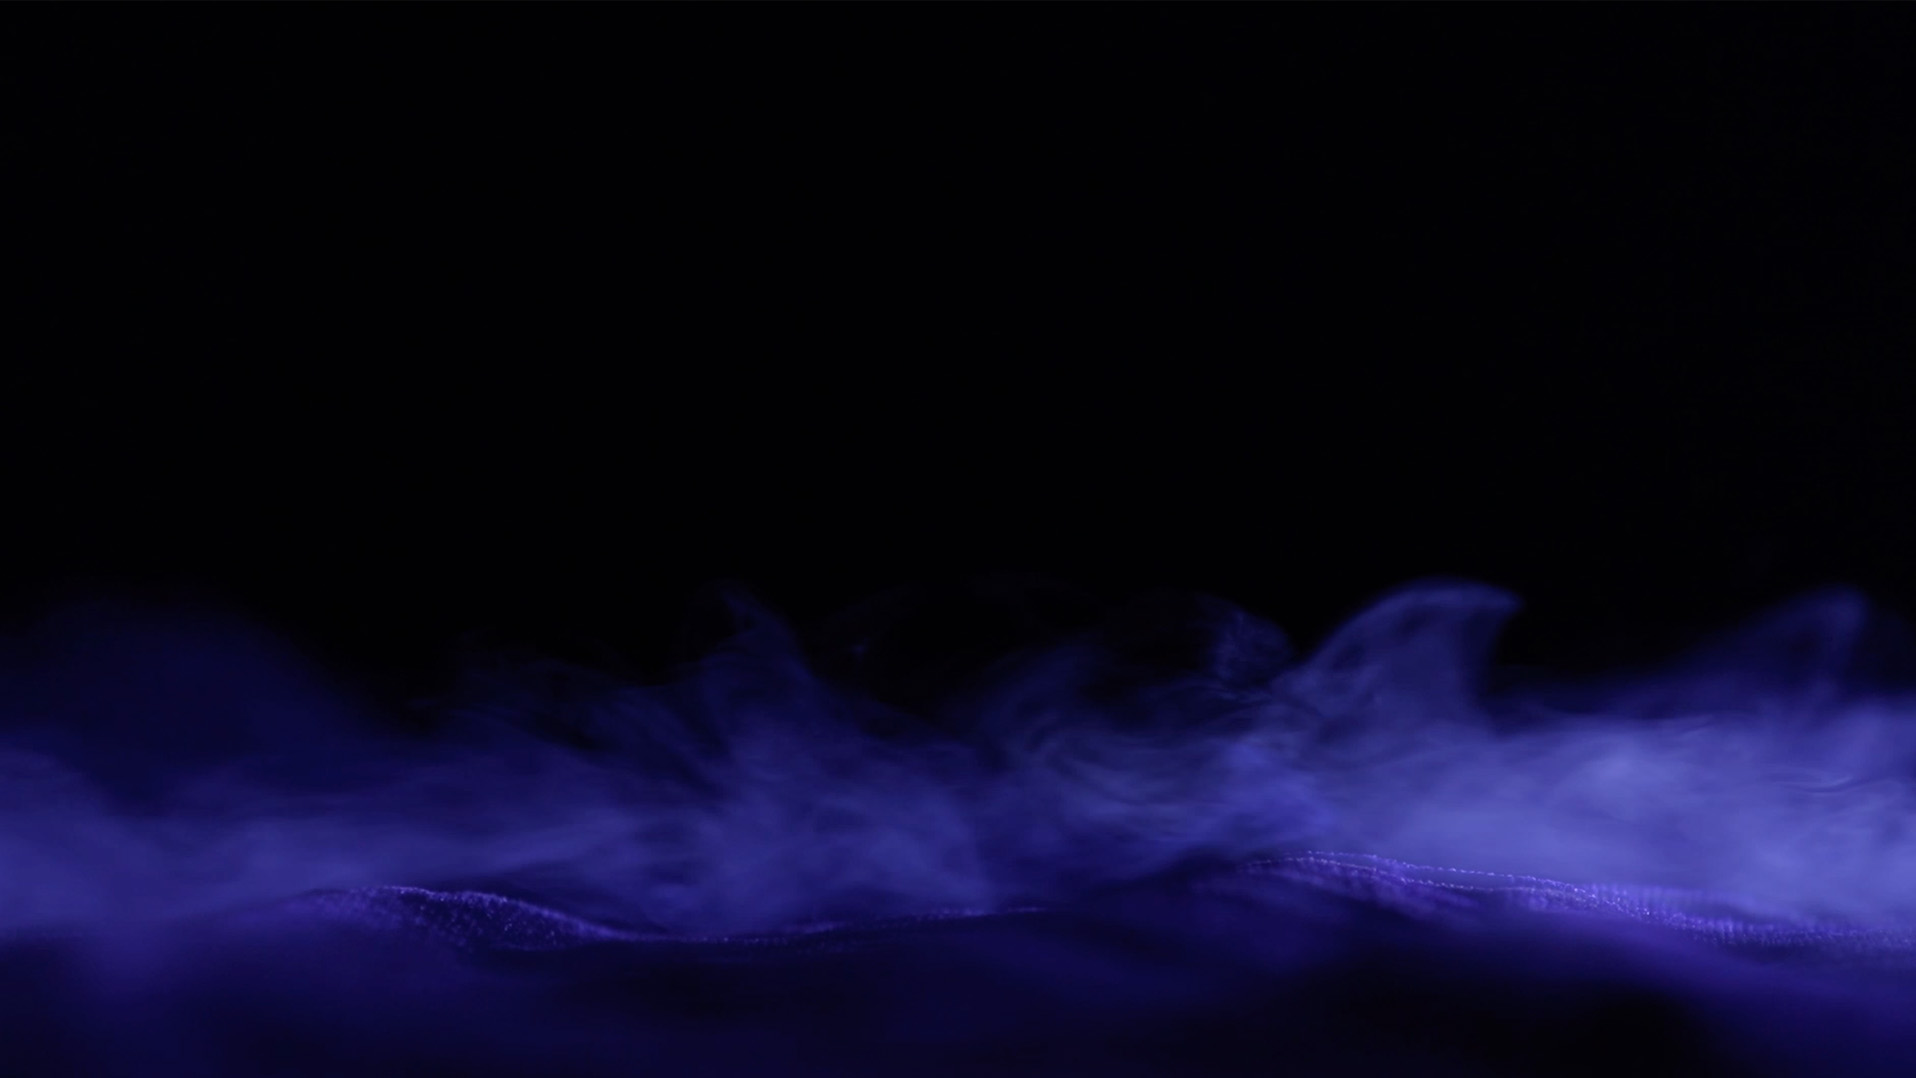 Abstract Blue Dry Ice Smoke Background Loop - MusicTruth ...